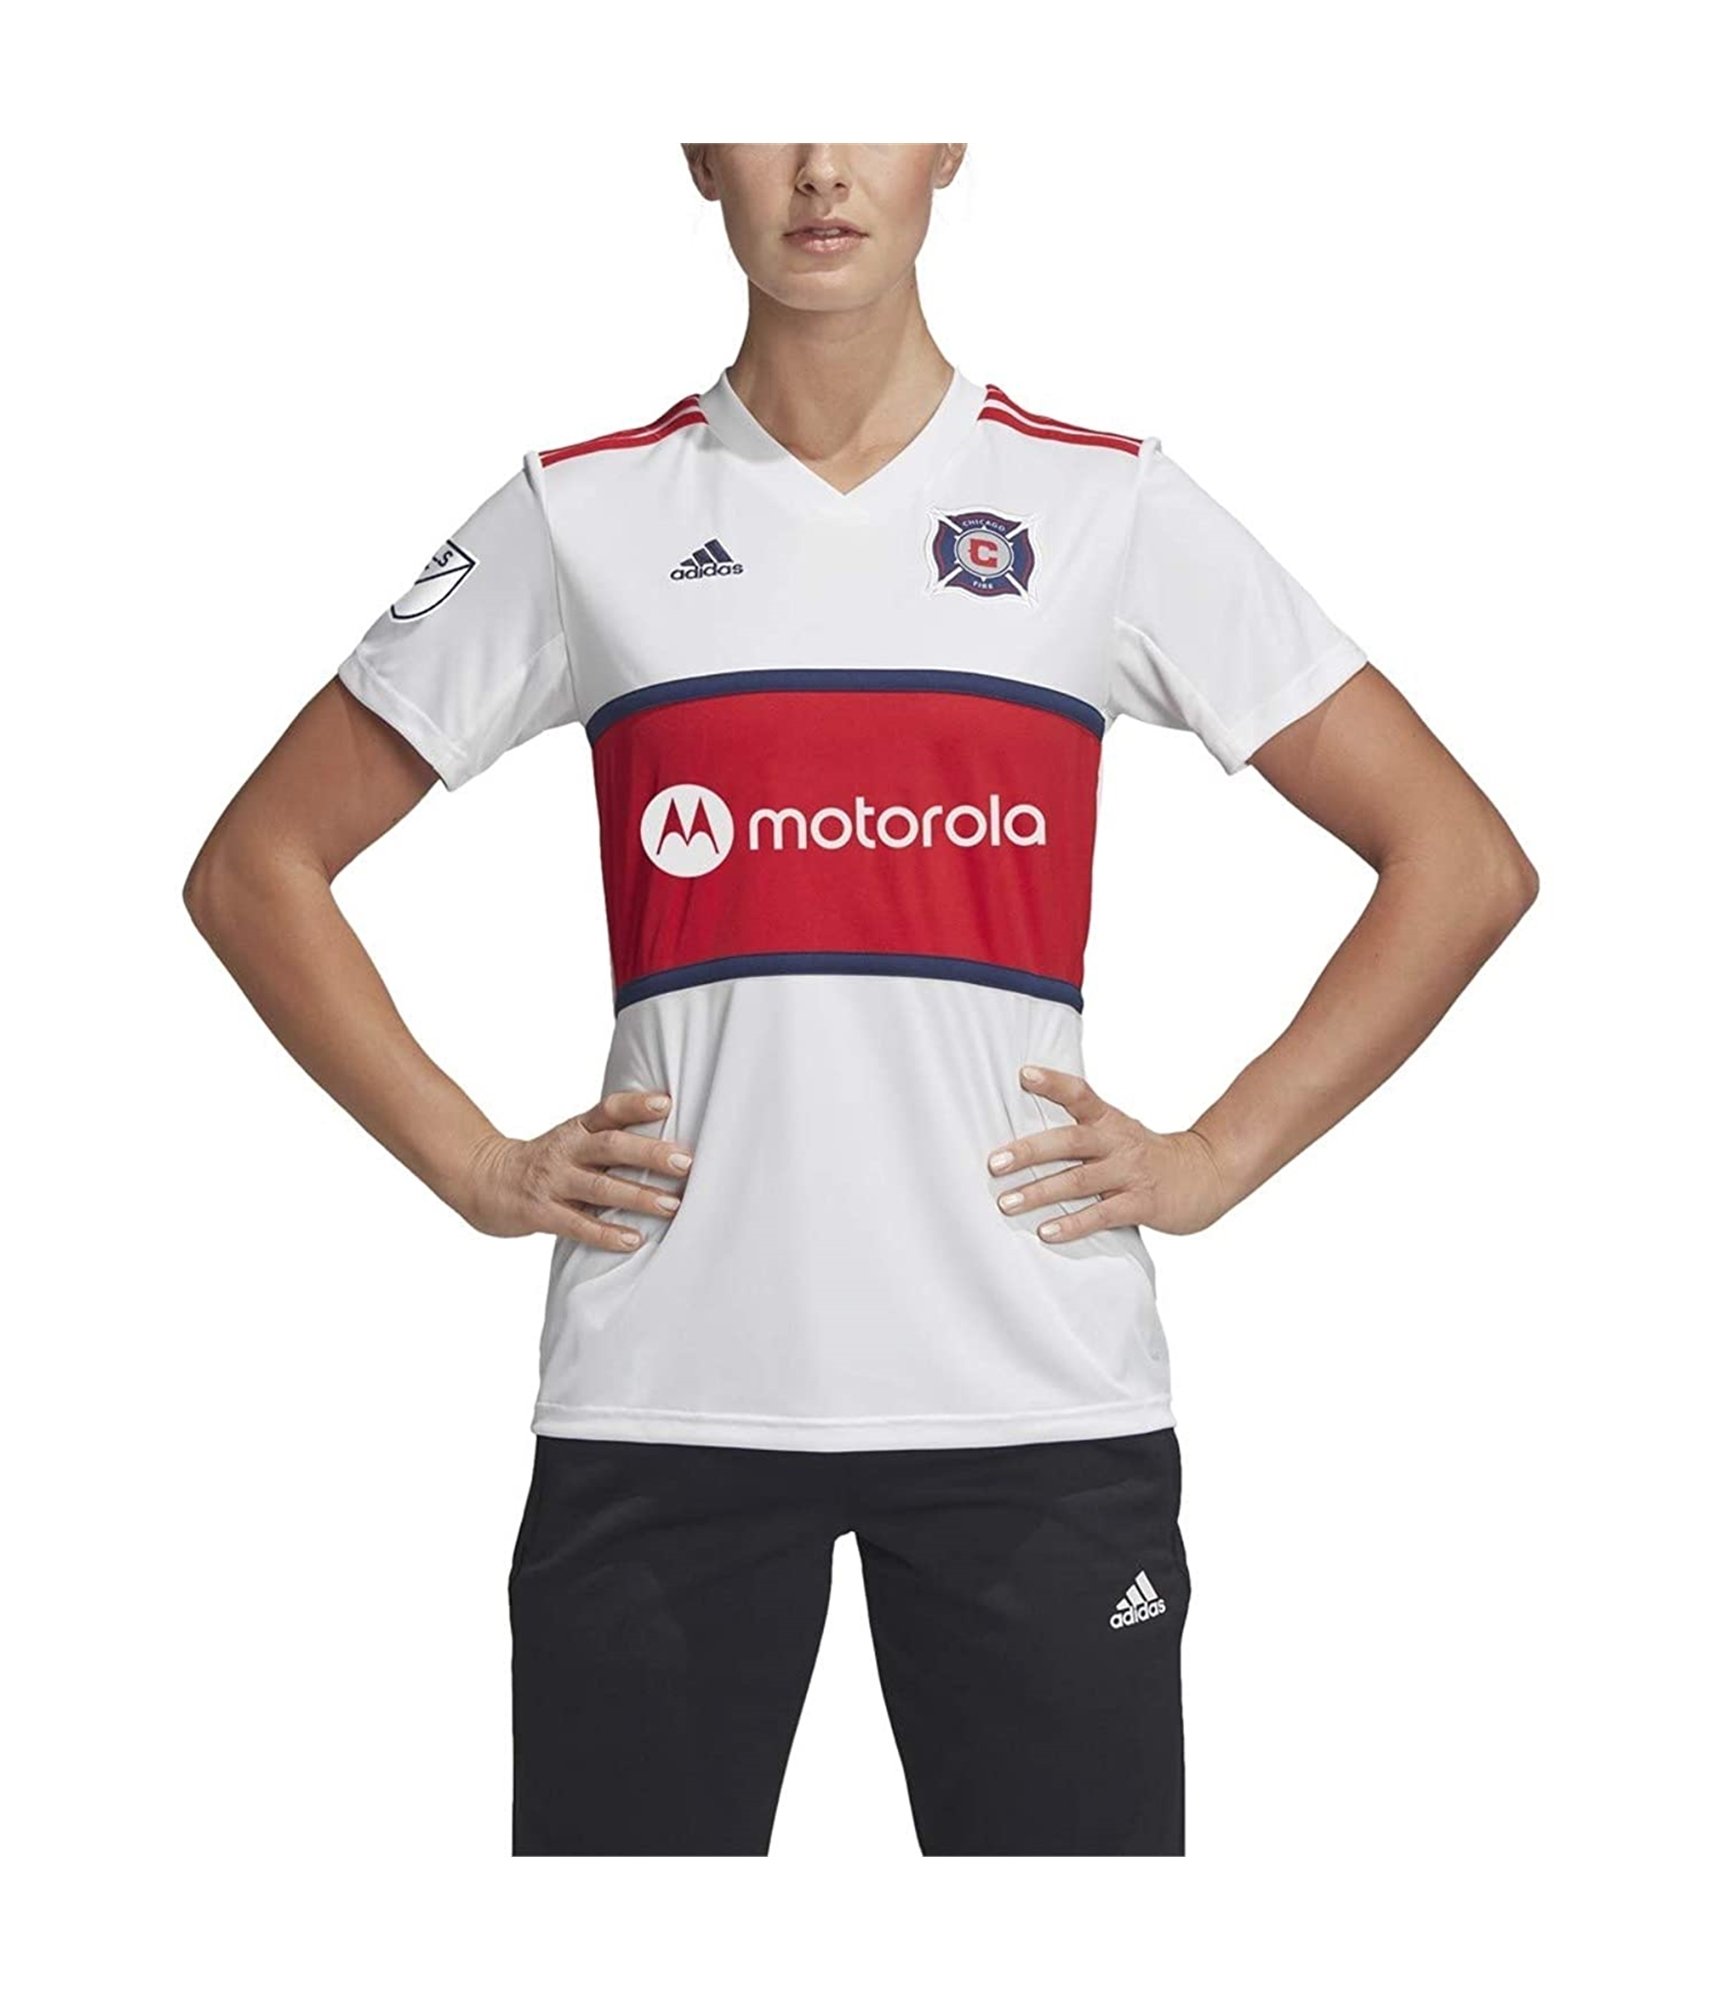 Chicago Fire Soccer Jersey